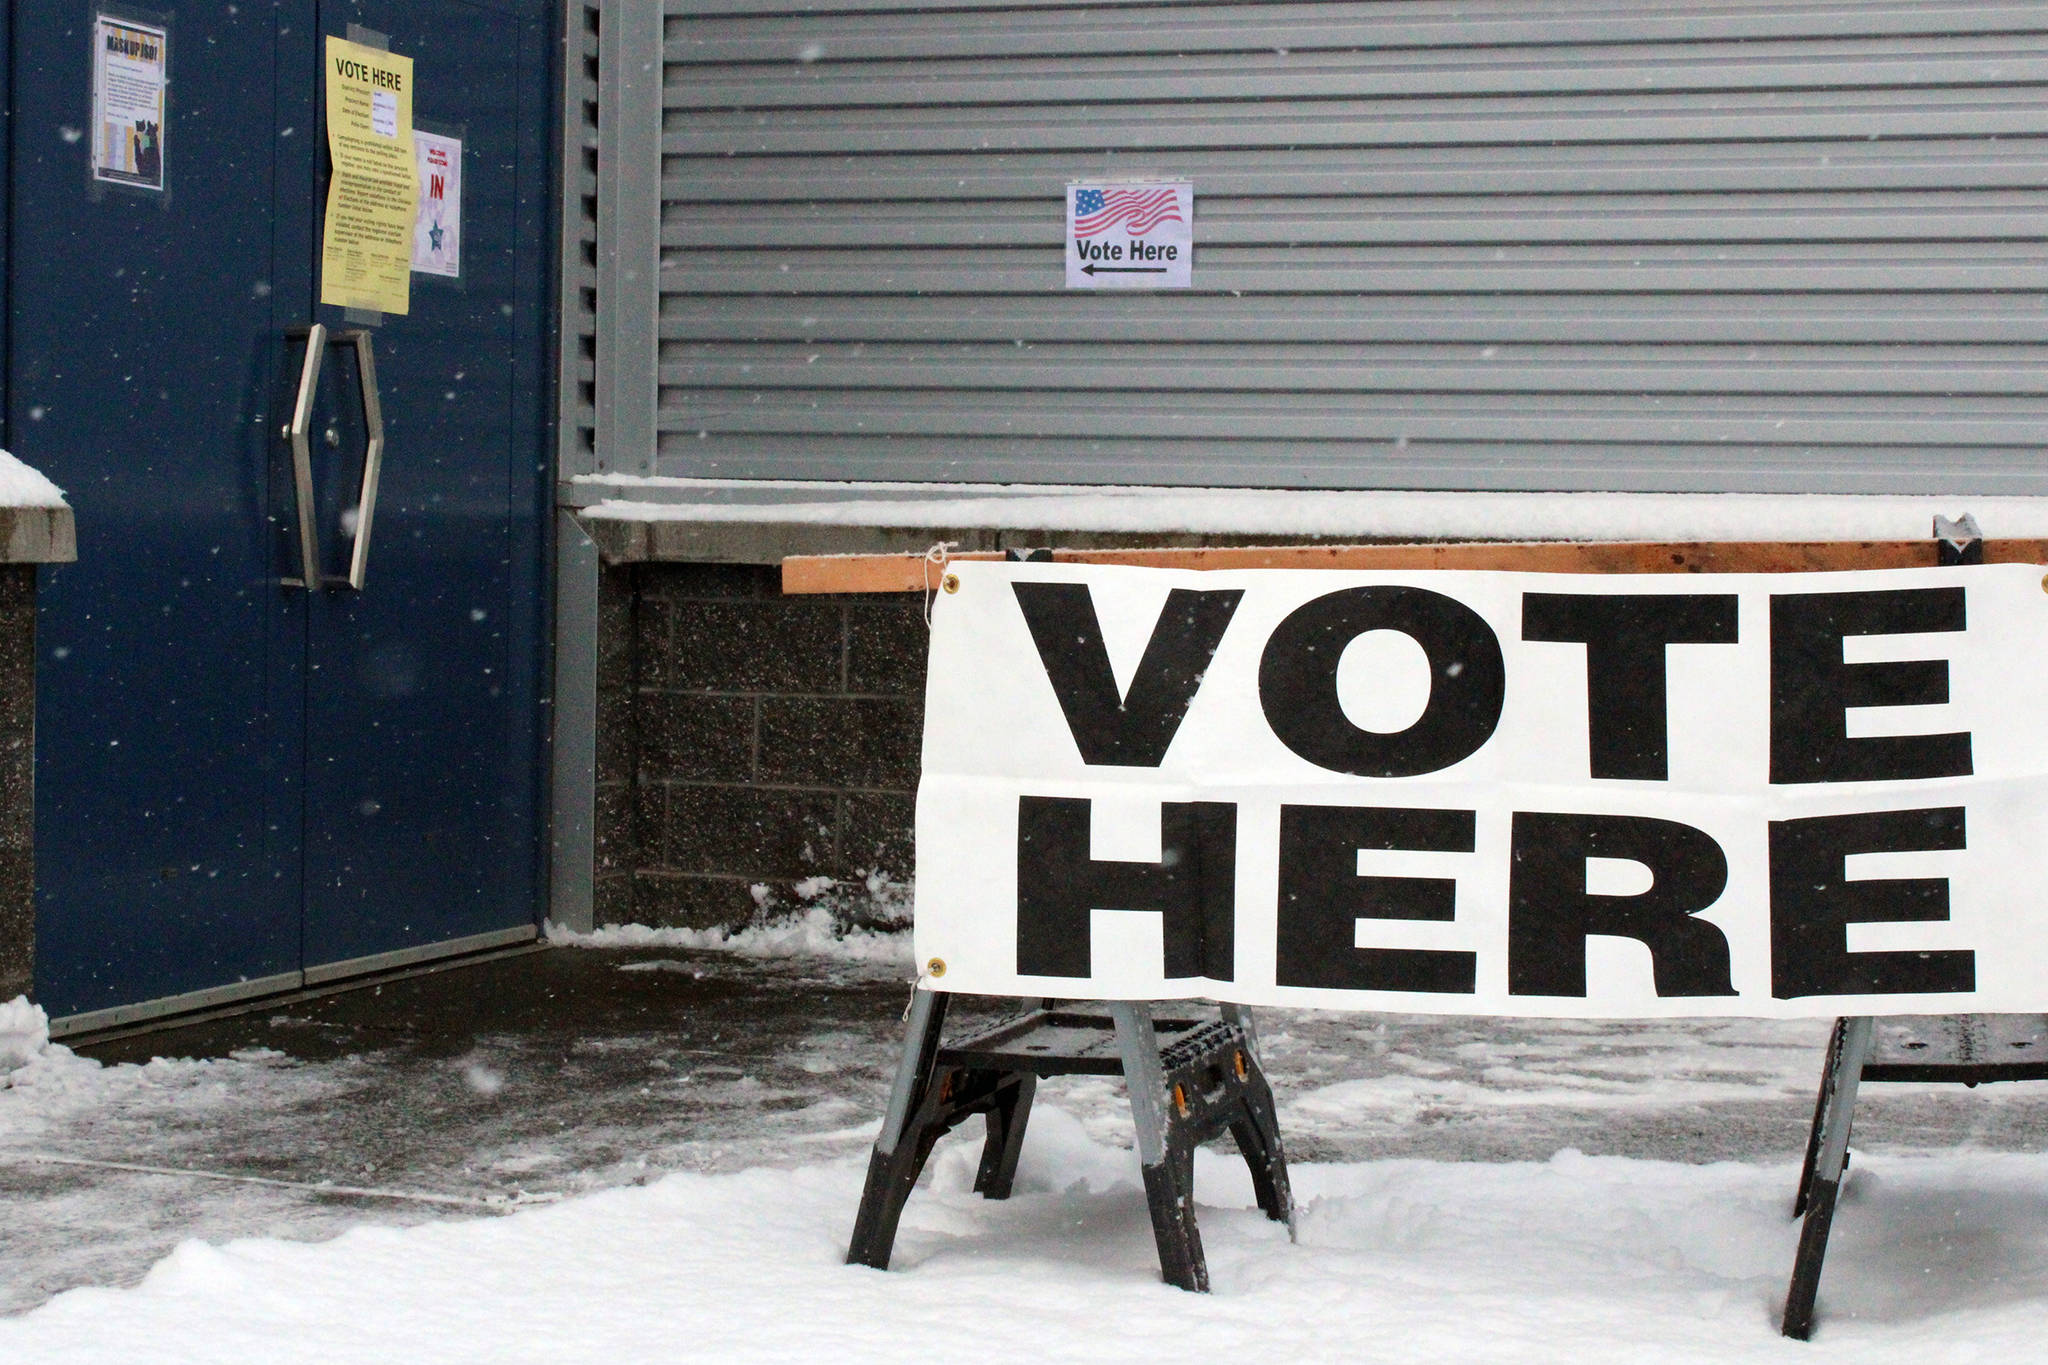 Thunder Mountain High School was used as a polling place on Election Day, Nov. 3, 2020. (Ben Hohenstatt / Juneau Empire)